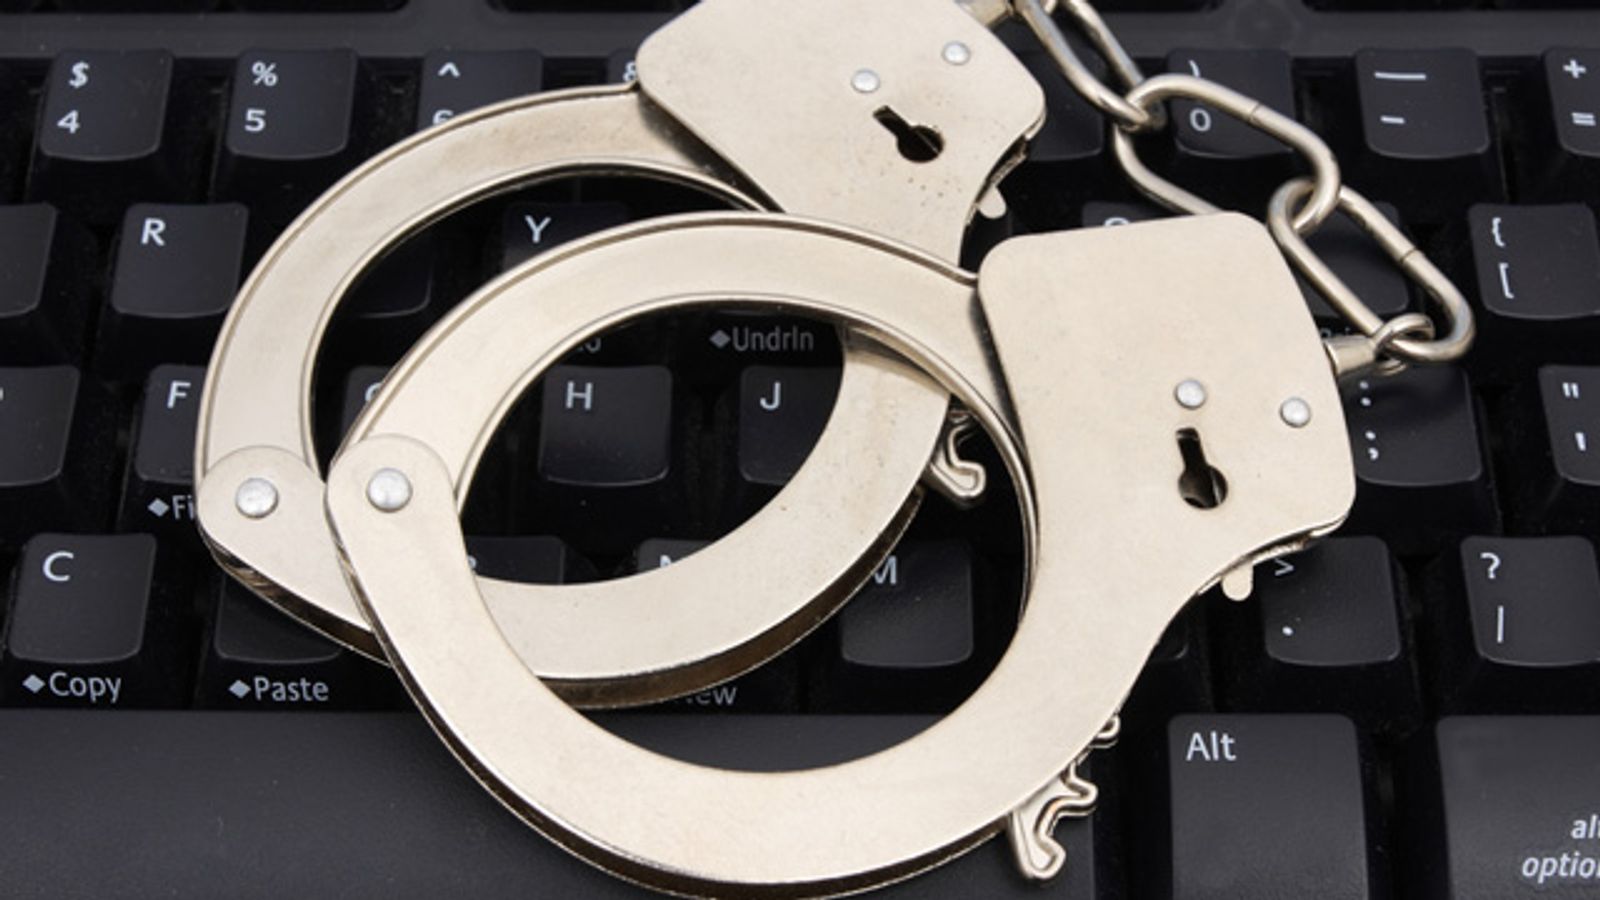 Thai Man Gets Year in Jail for Explicit Pics on Website